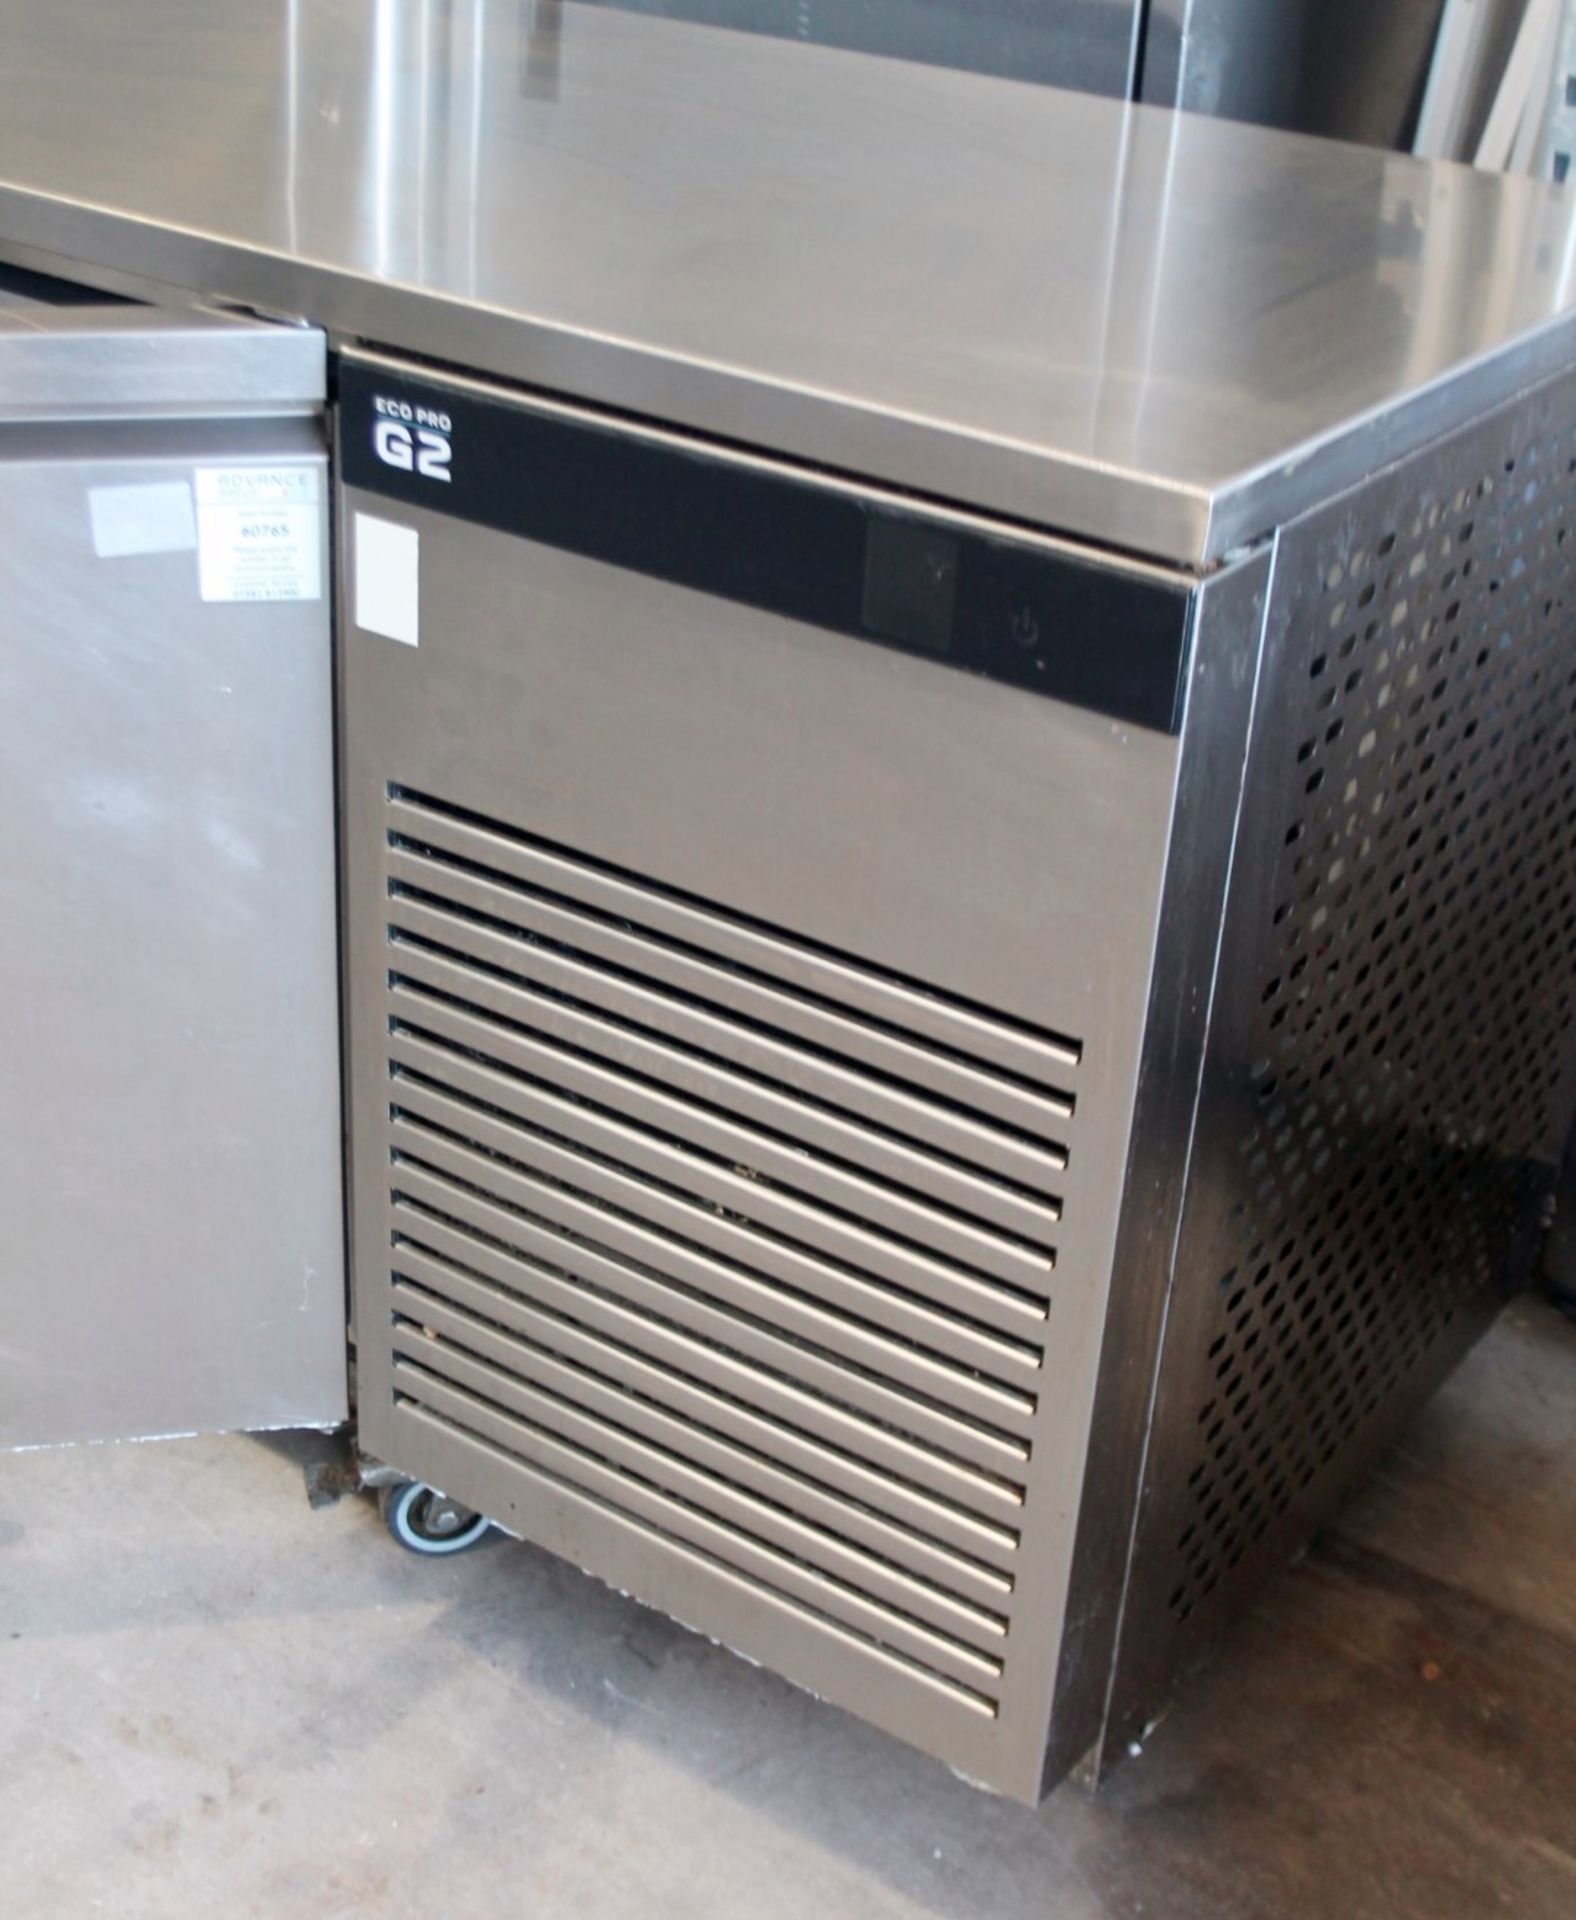 1 x Fosters EcoPro G2 3-Door Commercial Refrigerated Counter - Ref: GEN591 WH2 - CL802 UX - Image 6 of 8